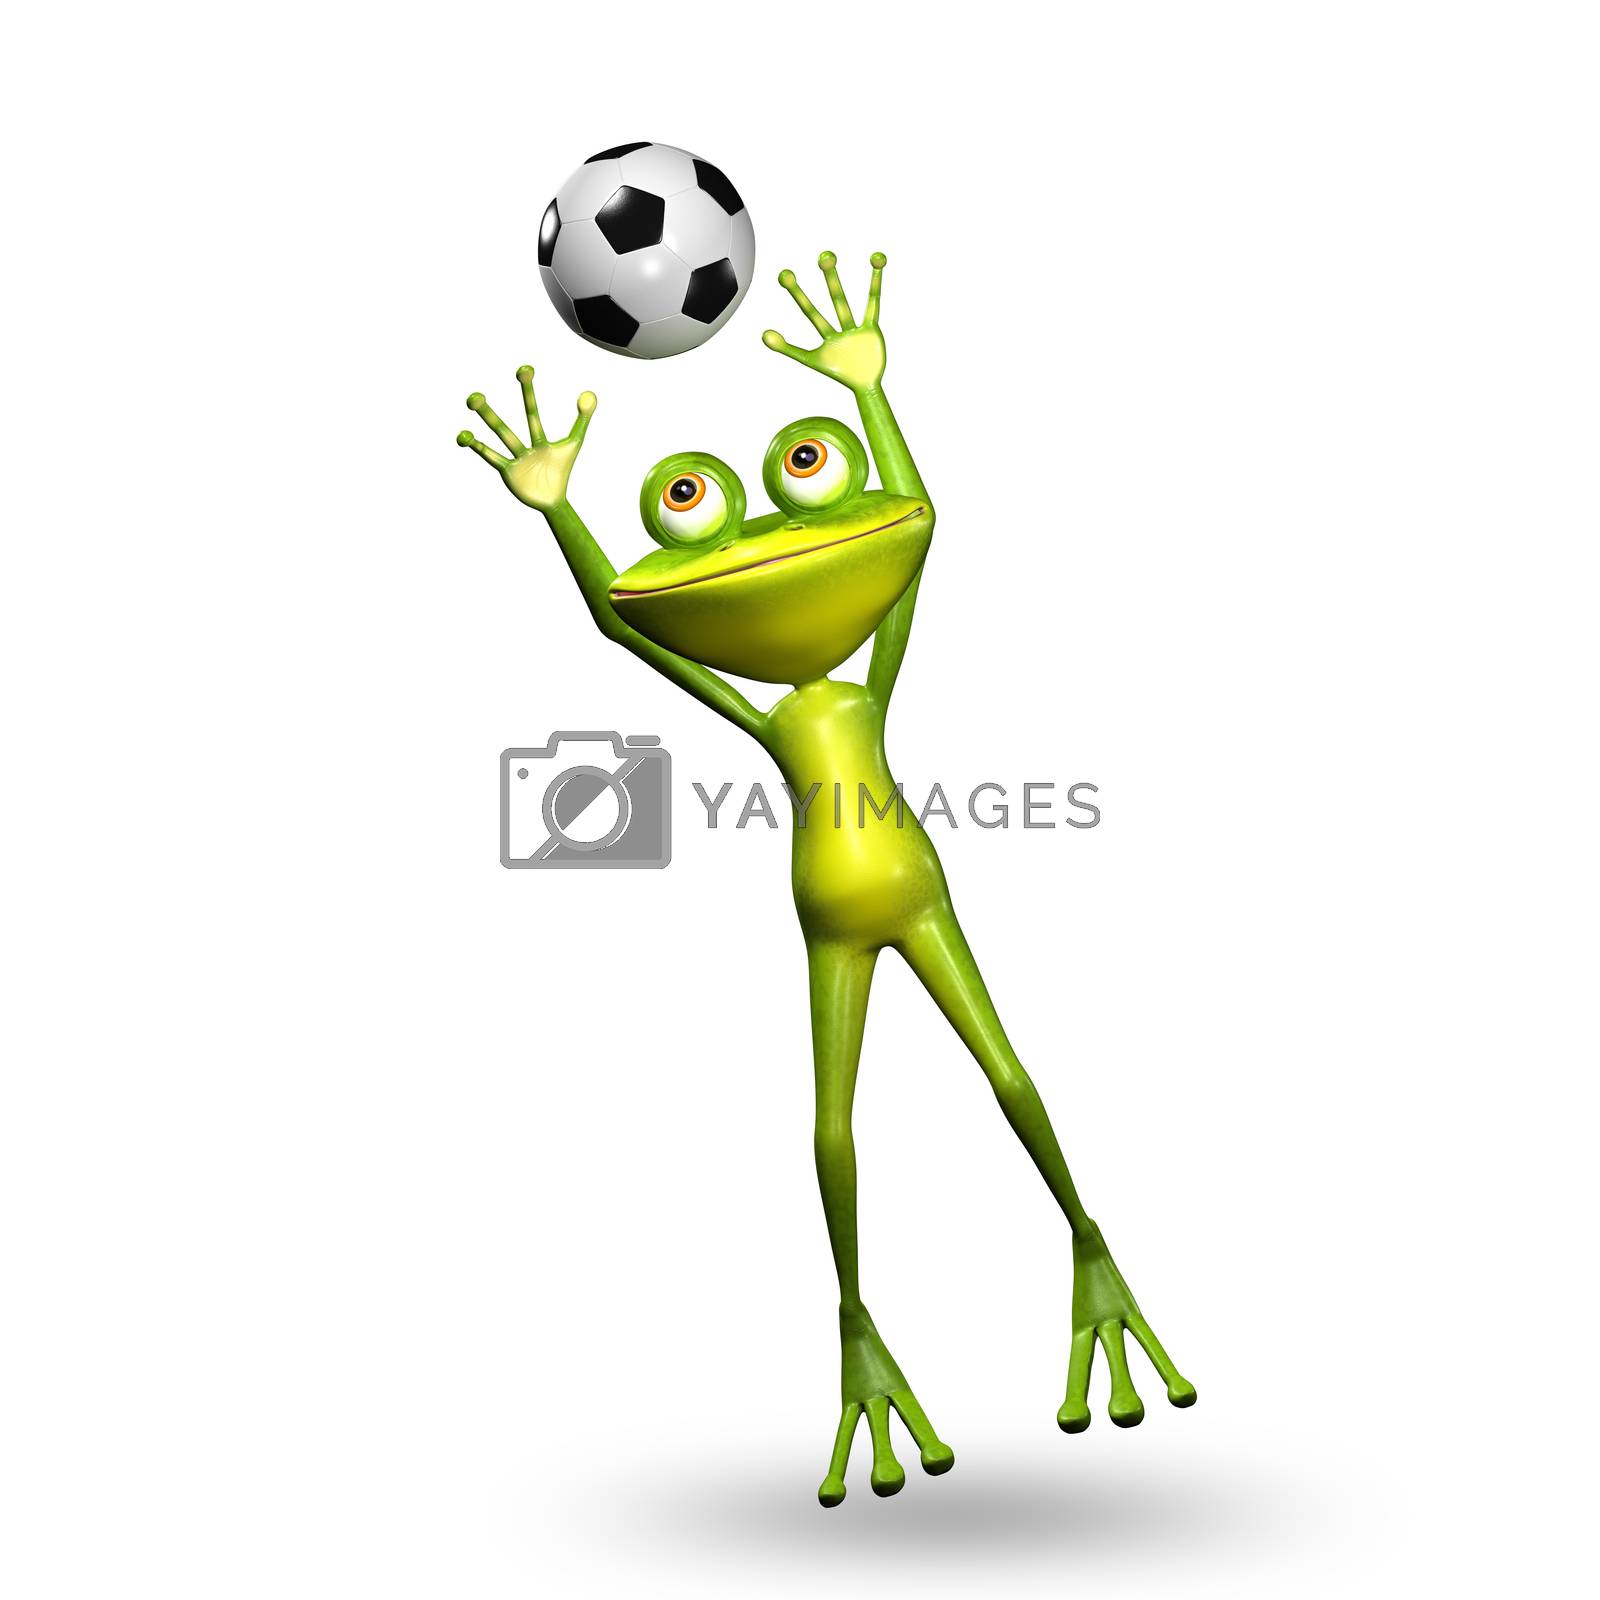 Royalty free image of 3D Illustration Frog with a Soccer Ball by brux